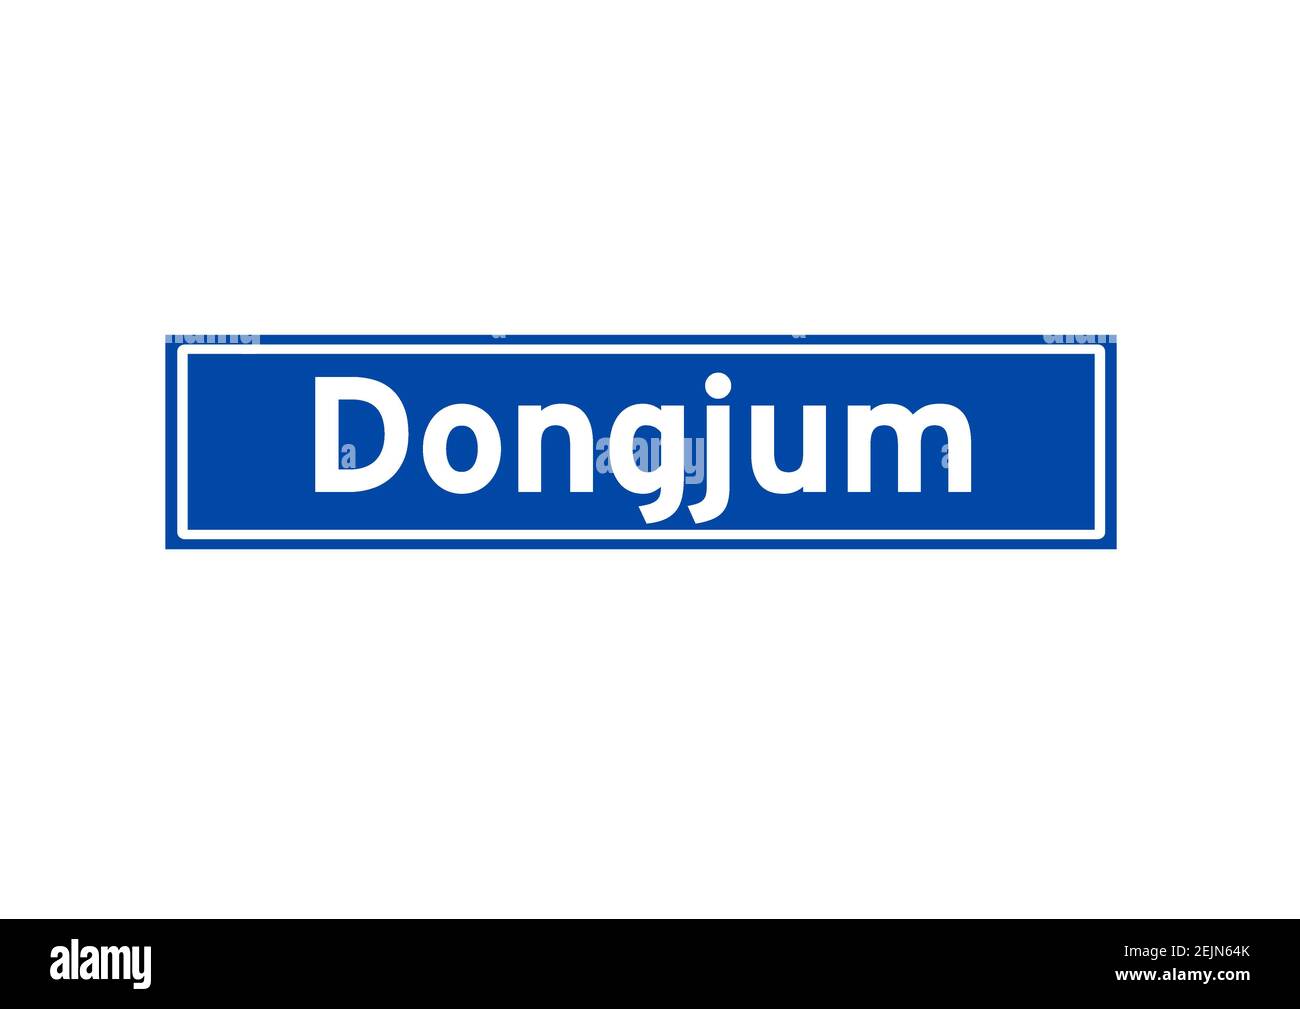 Dongjum isolated Dutch place name sign. City sign from the Netherlands. Stock Photo